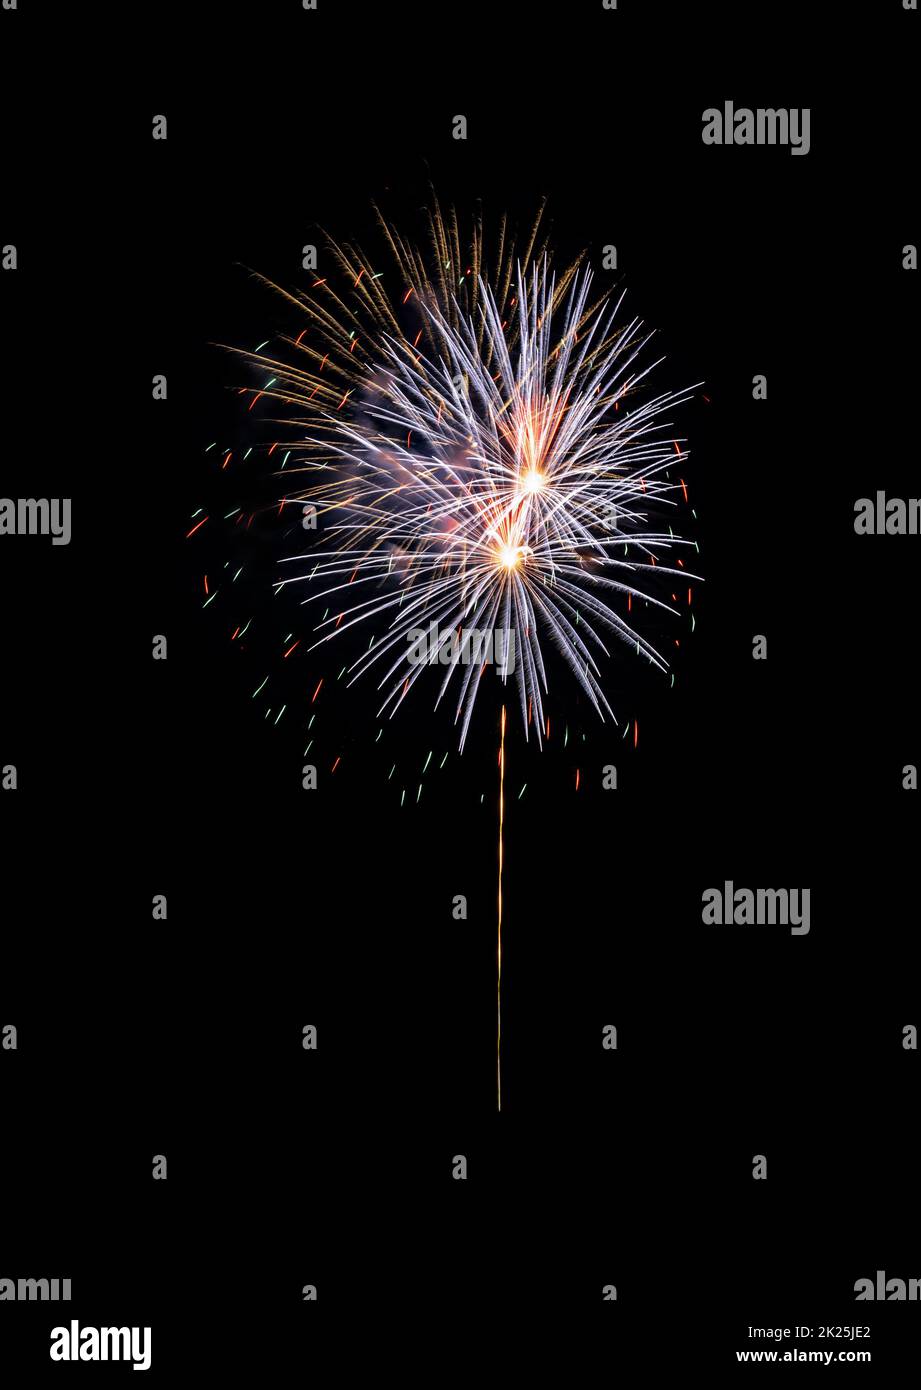 Colorful Fireworks explosion on black sky Stock Photo